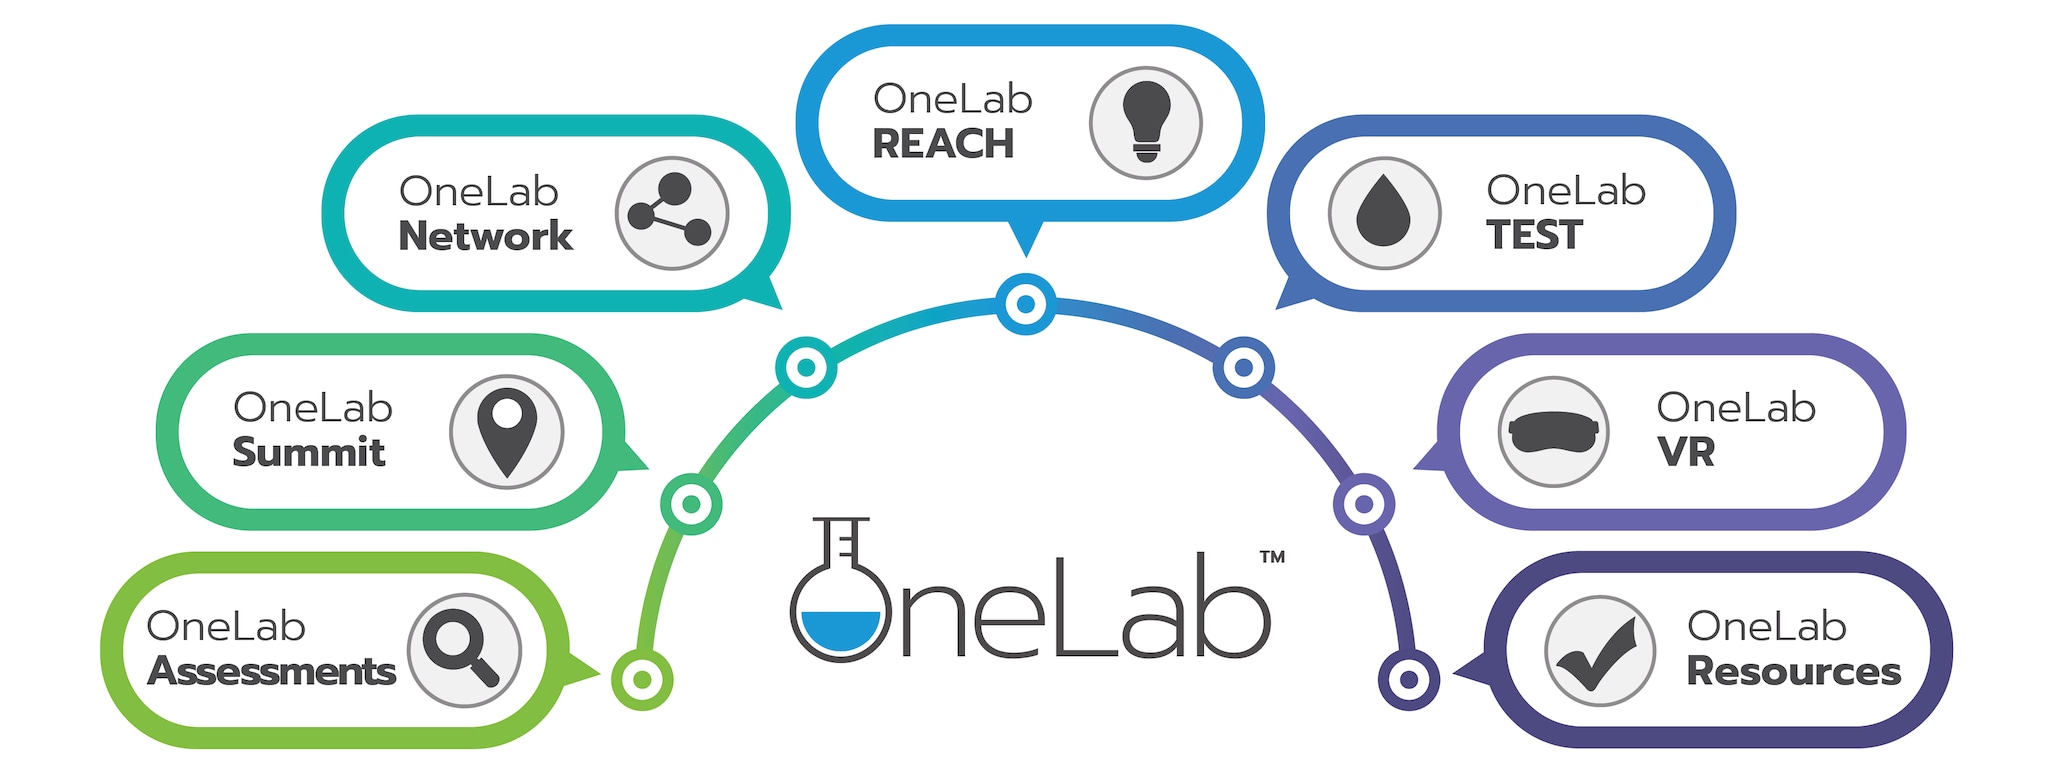 One circle with OneLab Initiative logo surrounded by a semi-circle with seven tabs coming off of it.